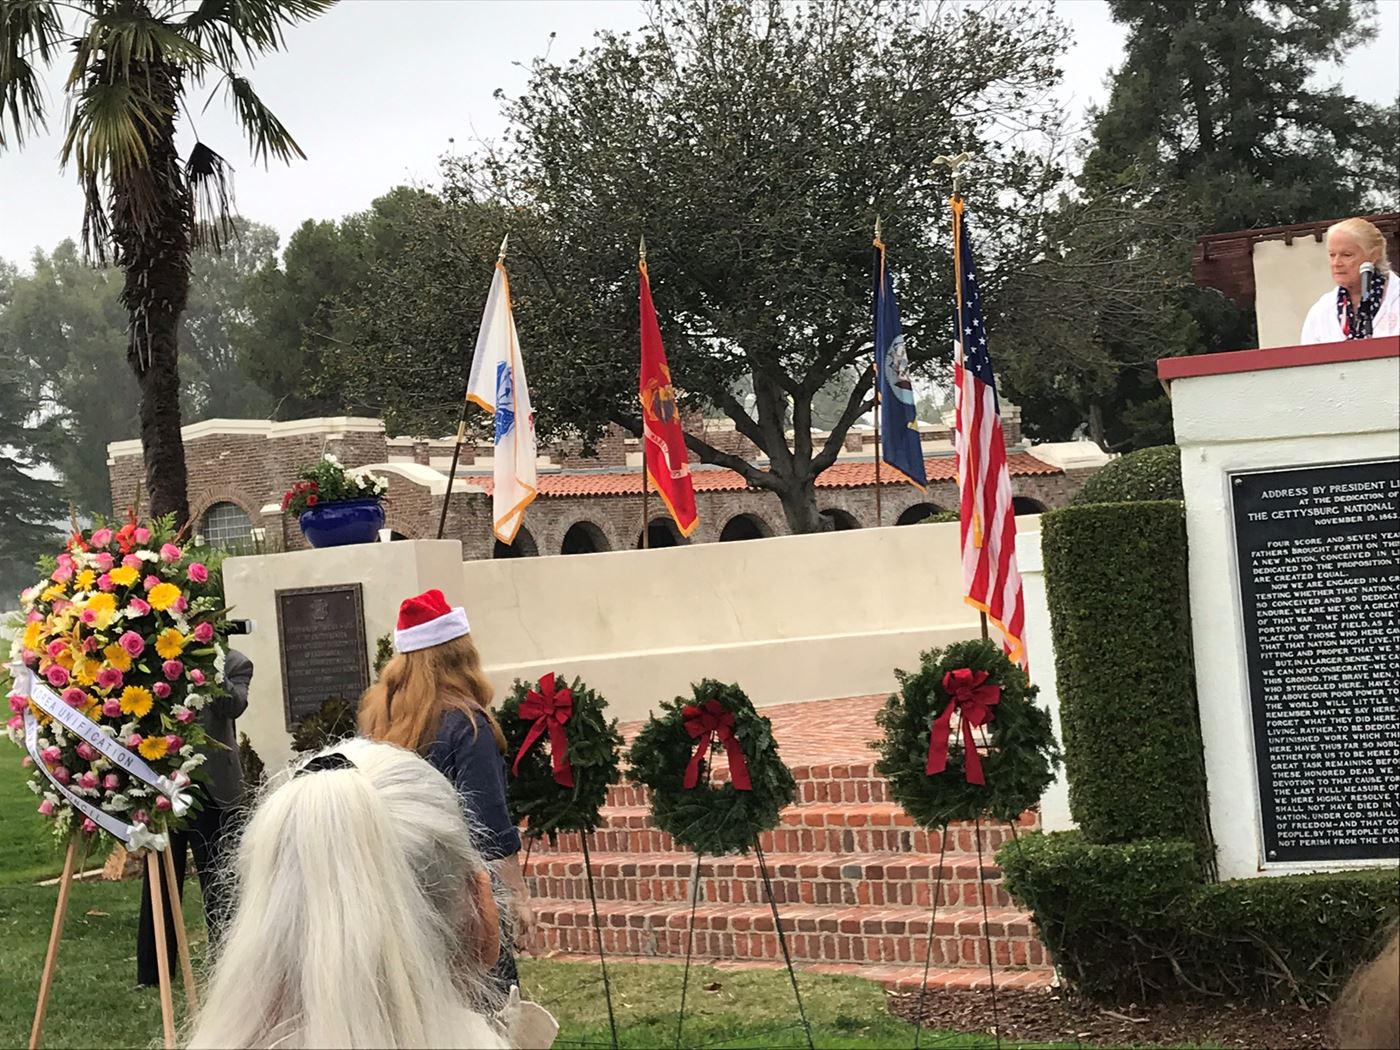 This is when they placed wreaths for each branch of the military services, they had a couple special floral ones placed
for the day.